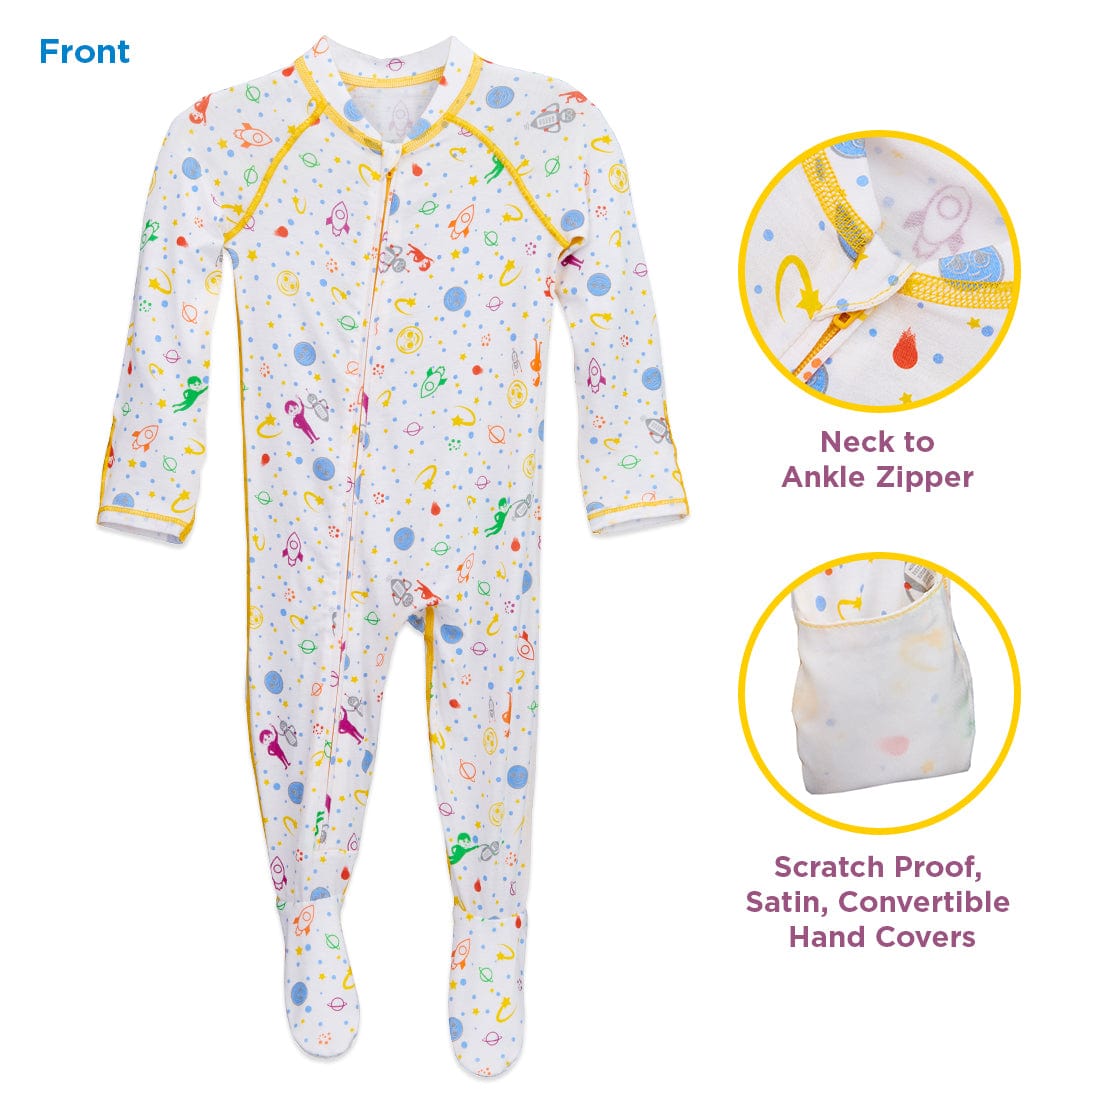 “Eczema Baby Pajama Sleep Suit with no scratch mittens and irritation free seams made from TENCEL Prevent scratching during sleep”